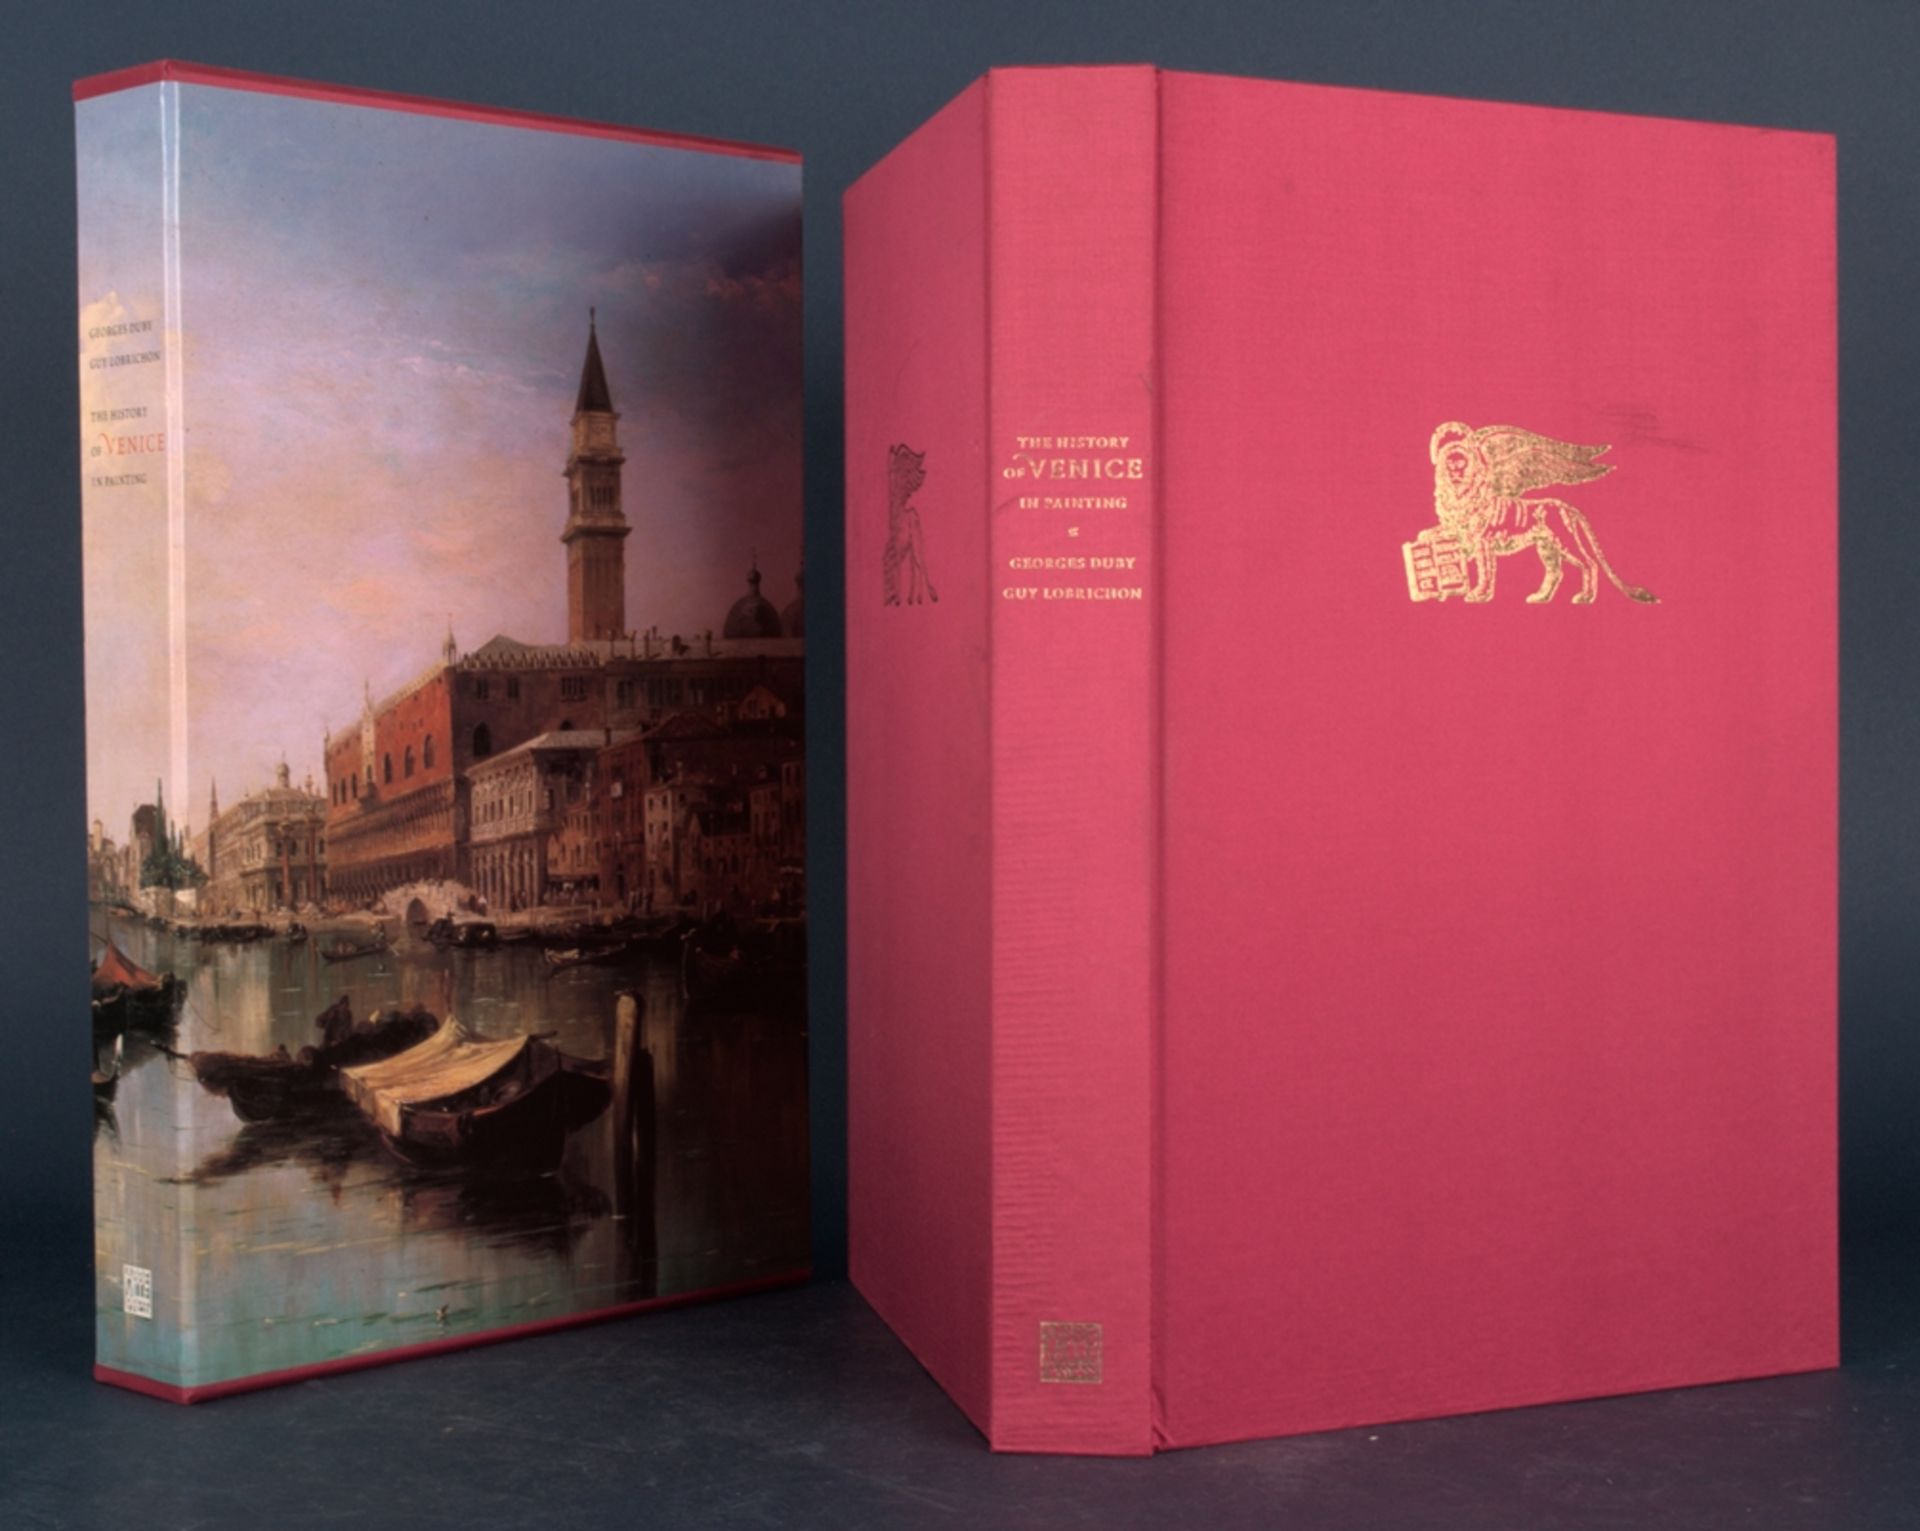 "The History of Venice in Painting", edited by Georges Duby & Guy Lobrichon, Abbeville Publishers - Bild 4 aus 8